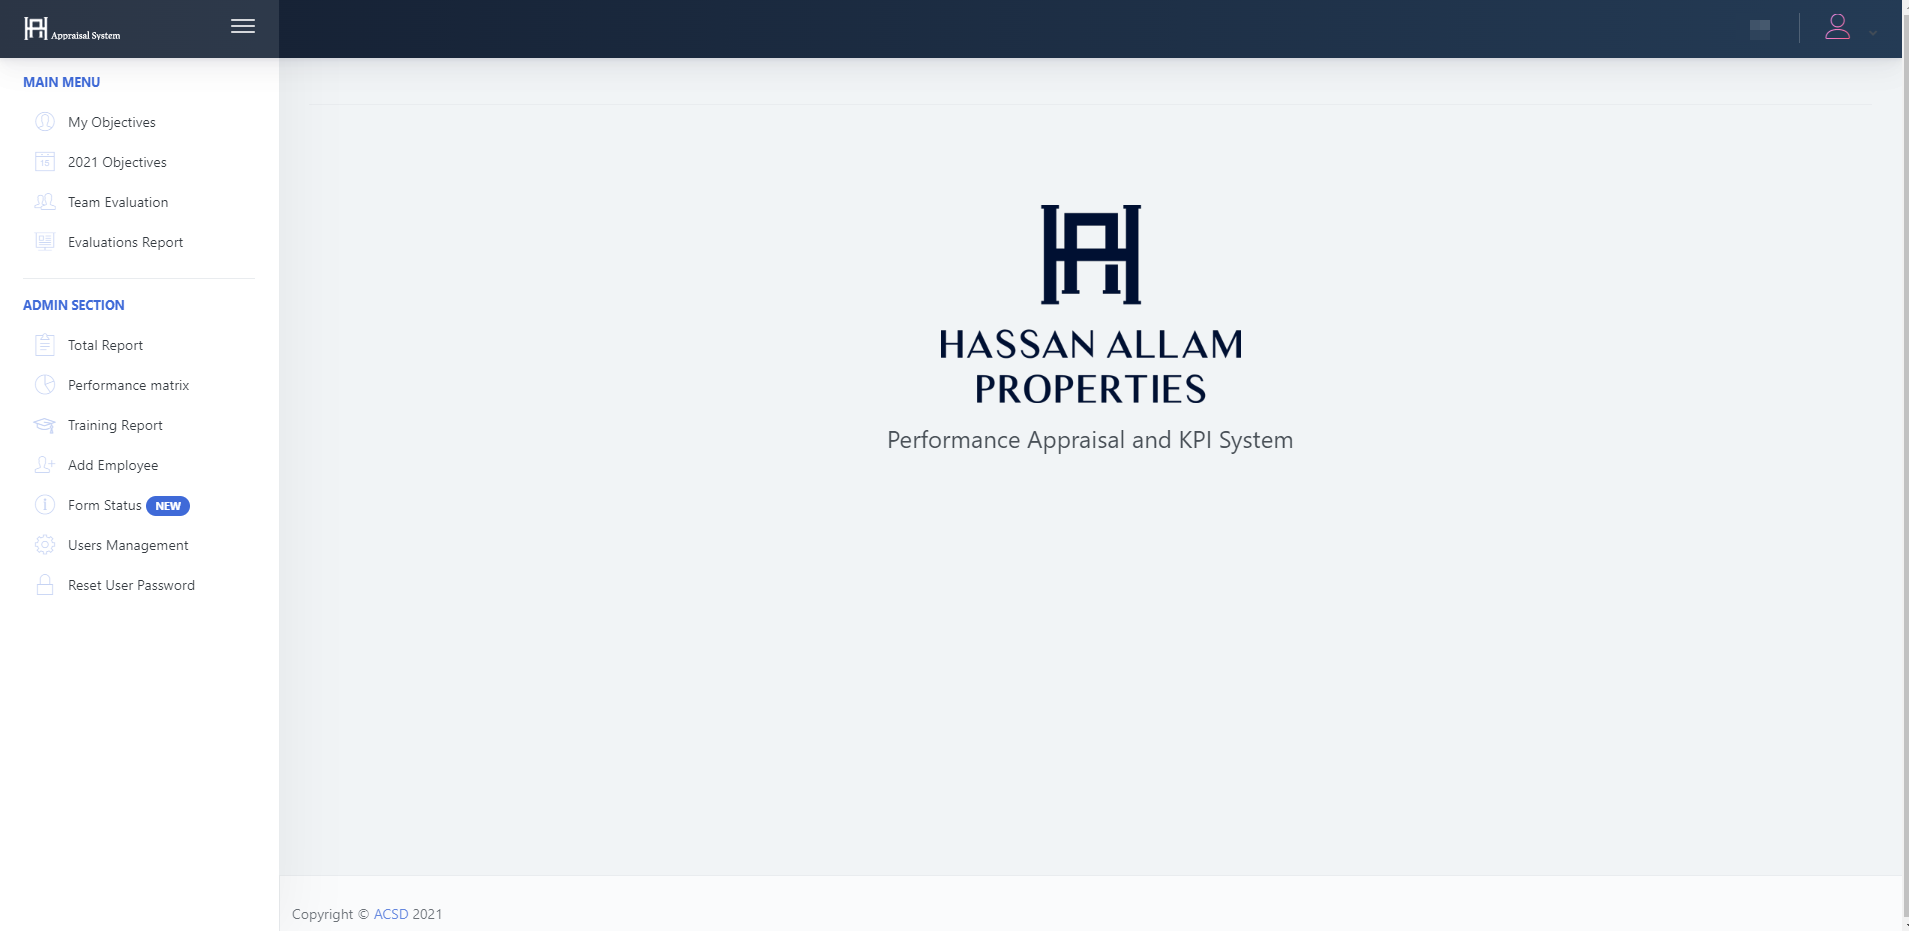 Hassan Allam Group